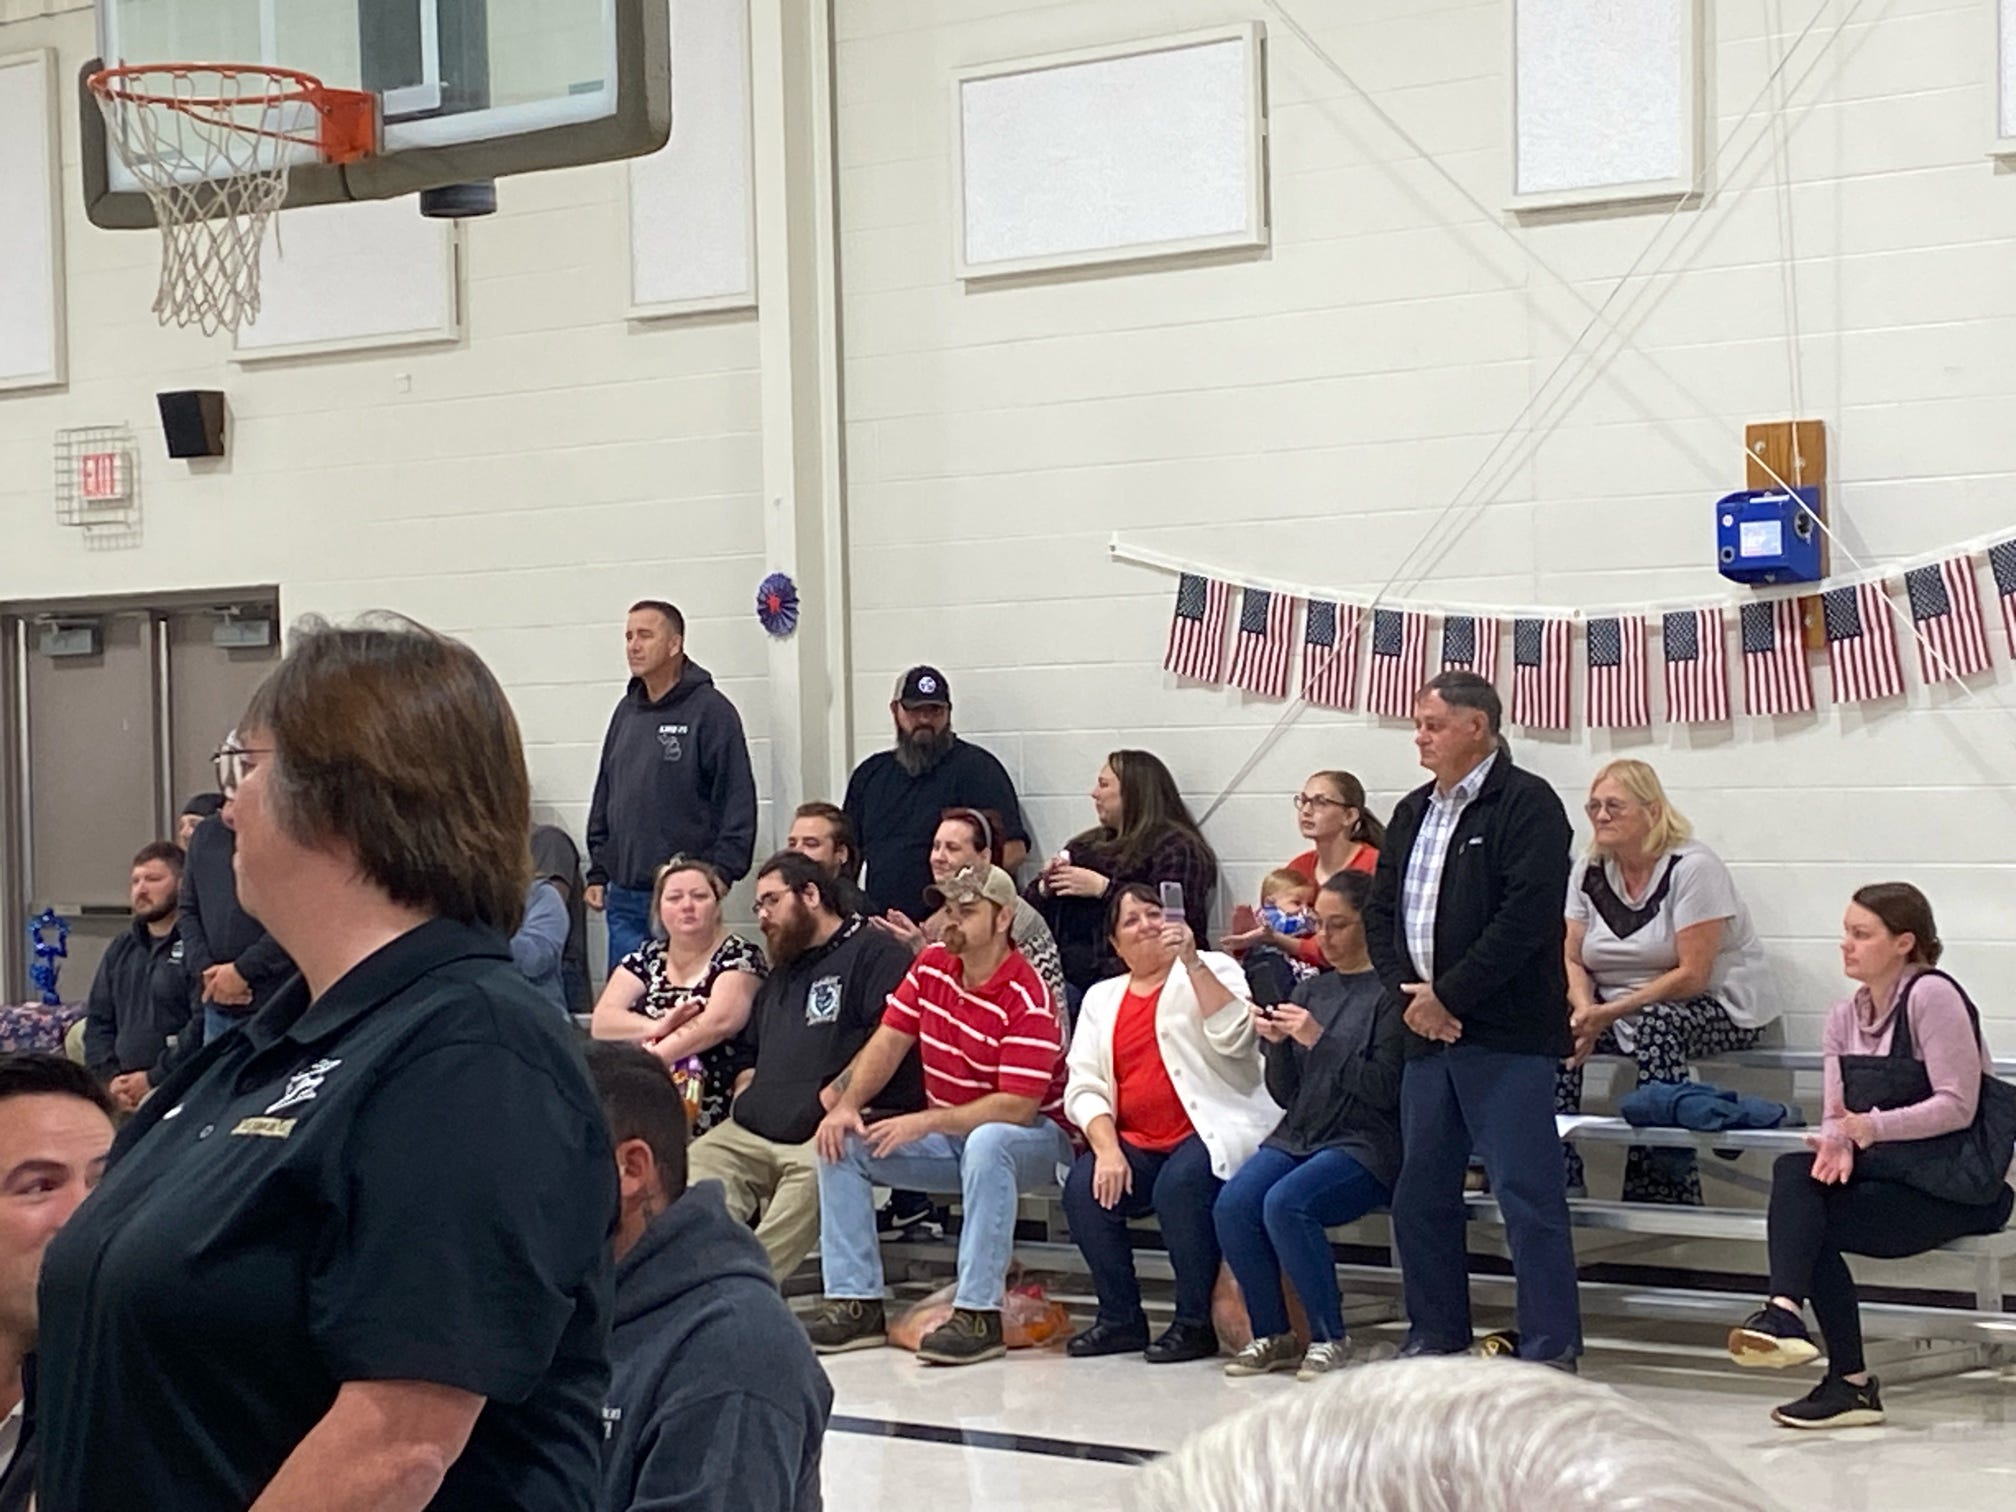 The Veterans Day program included musical presentations from all students, letters to veterans, and much more! We honored Veterans with a slide show and honored those present by branch of service. 